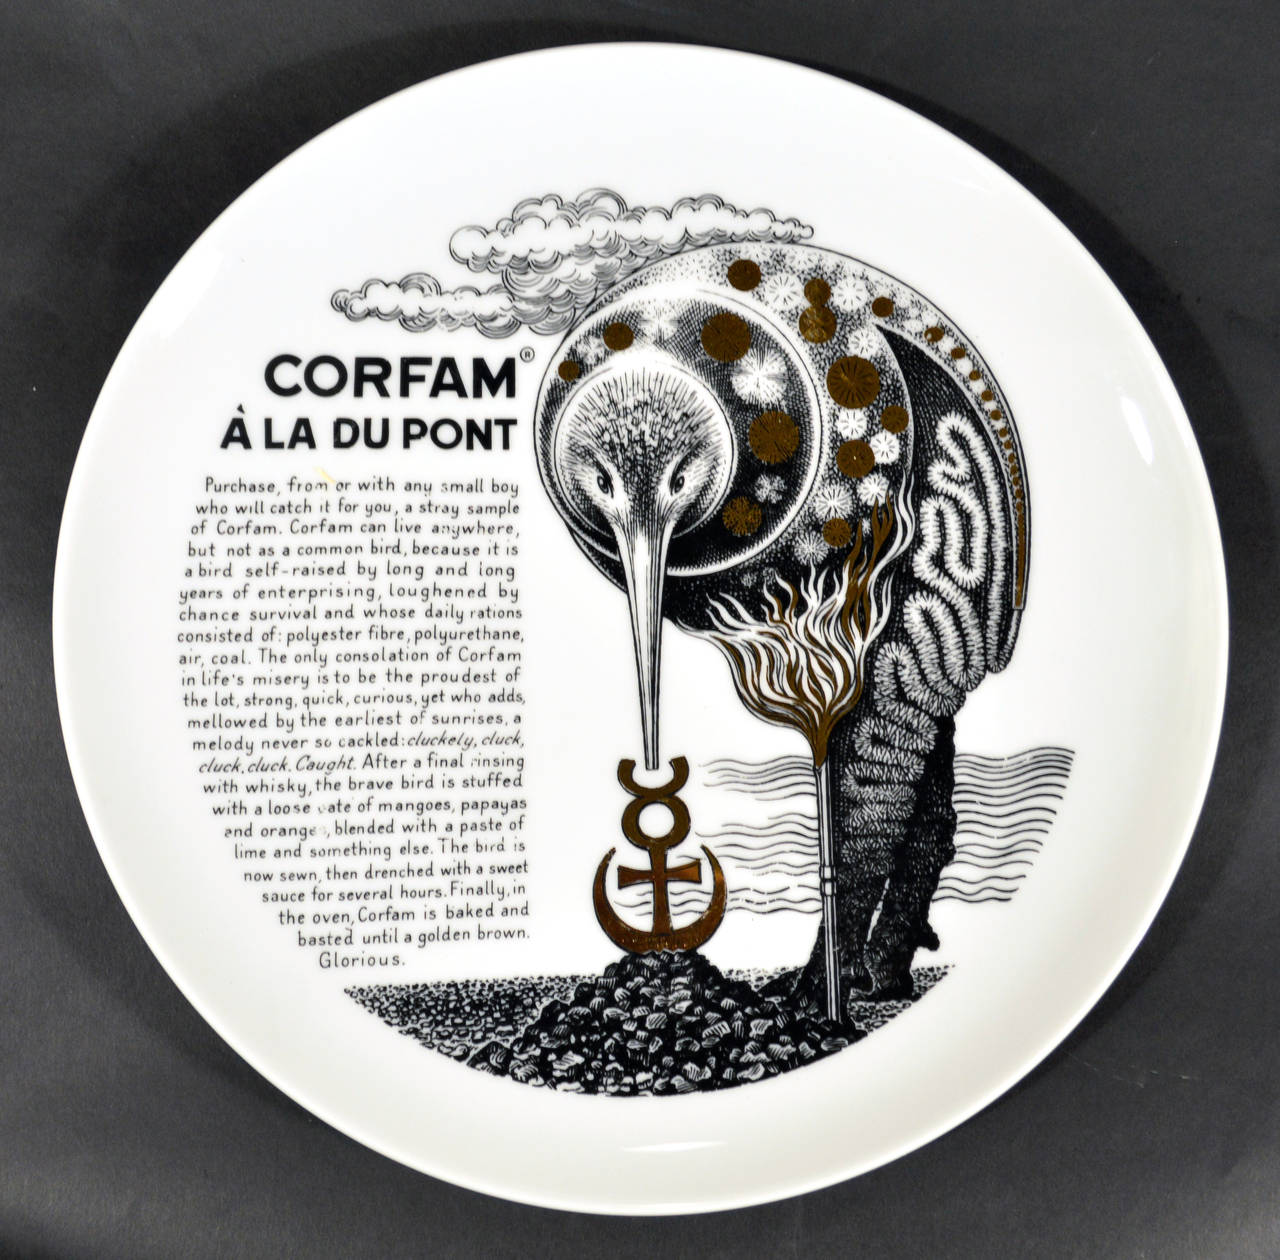 Diameter: 10 1/4.

The Fleming Joffe company was a small leather goods company in New York. Fornasetti was not the only famous artist this company worked with. Andy Warhol produced ads and copy for them as well as decorating their show booths and